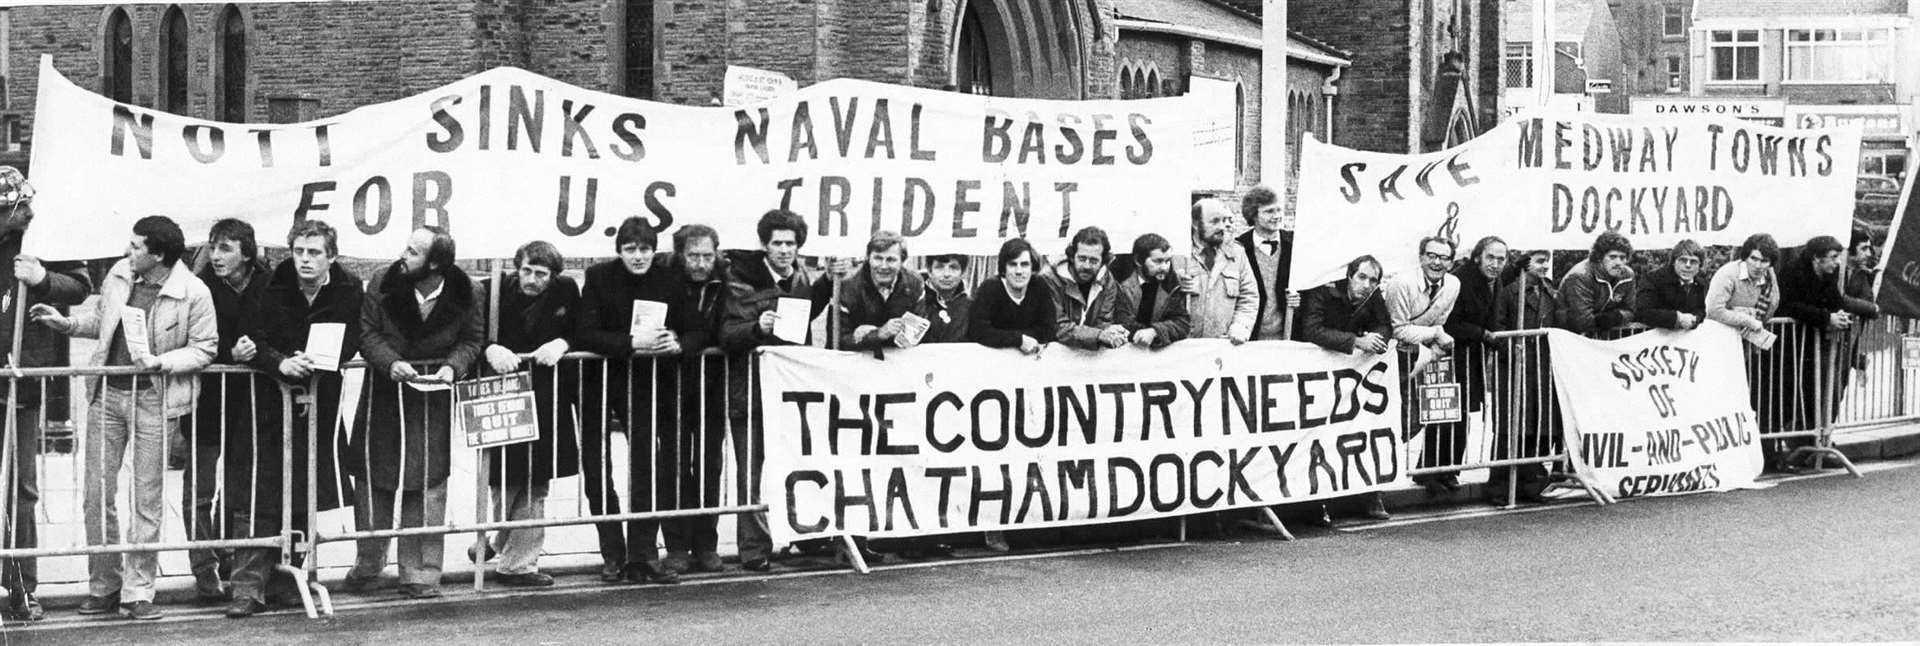 Protesters against the closure of Chatham Dockyard get their message across outside the Conservative Party conference in Blackpool in October 1981.